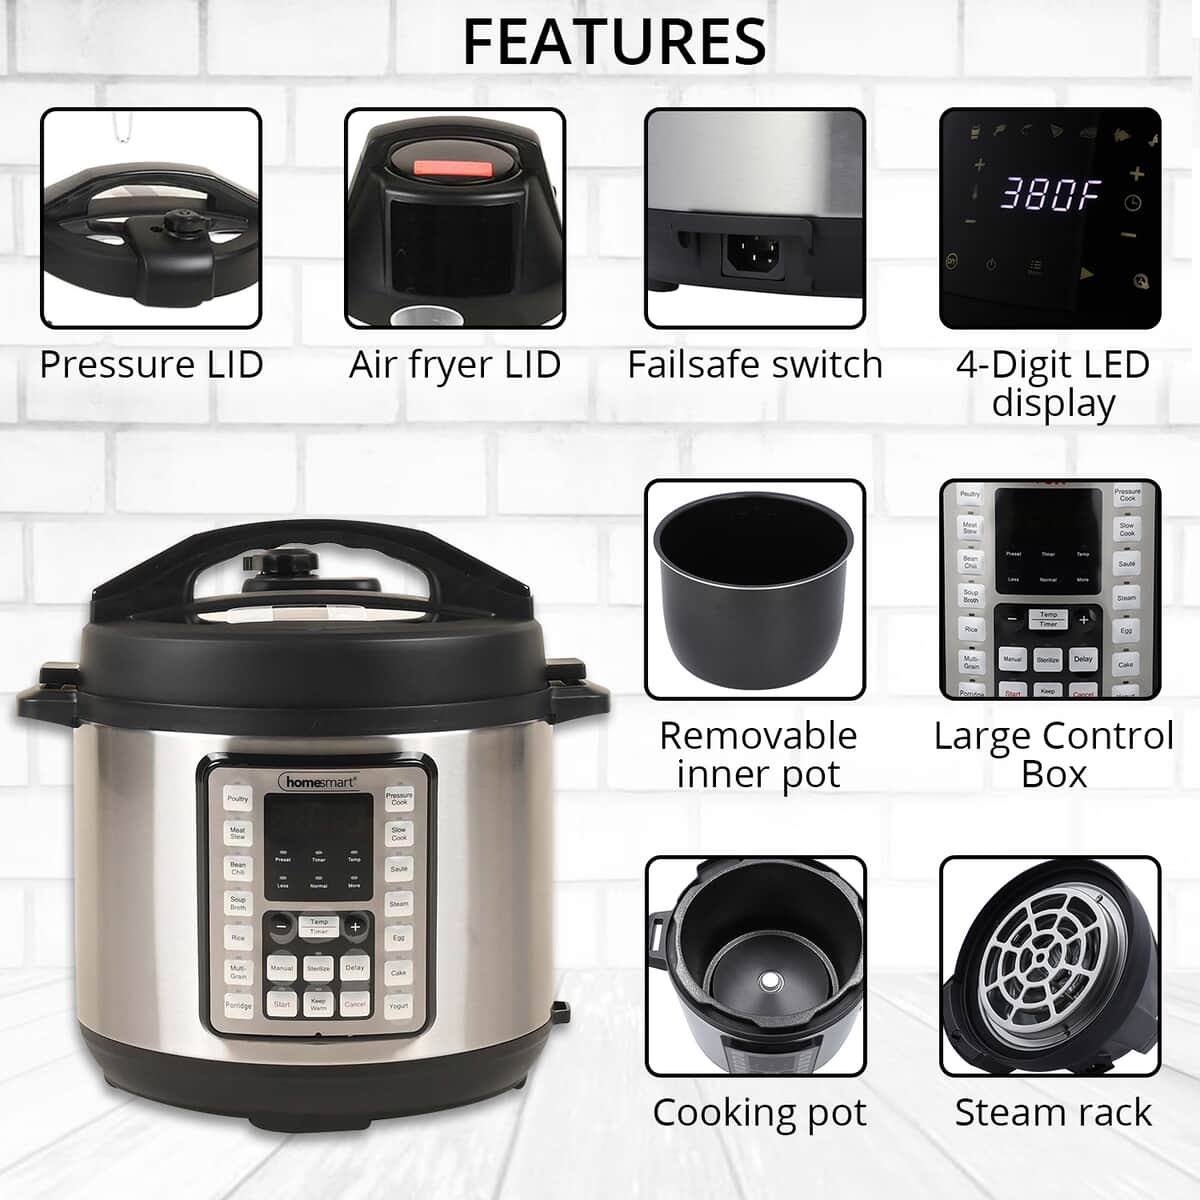 Homesmart 2 in 1 Air Fryer and Pressure Cooker in Stainless Steel (6 L) image number 2